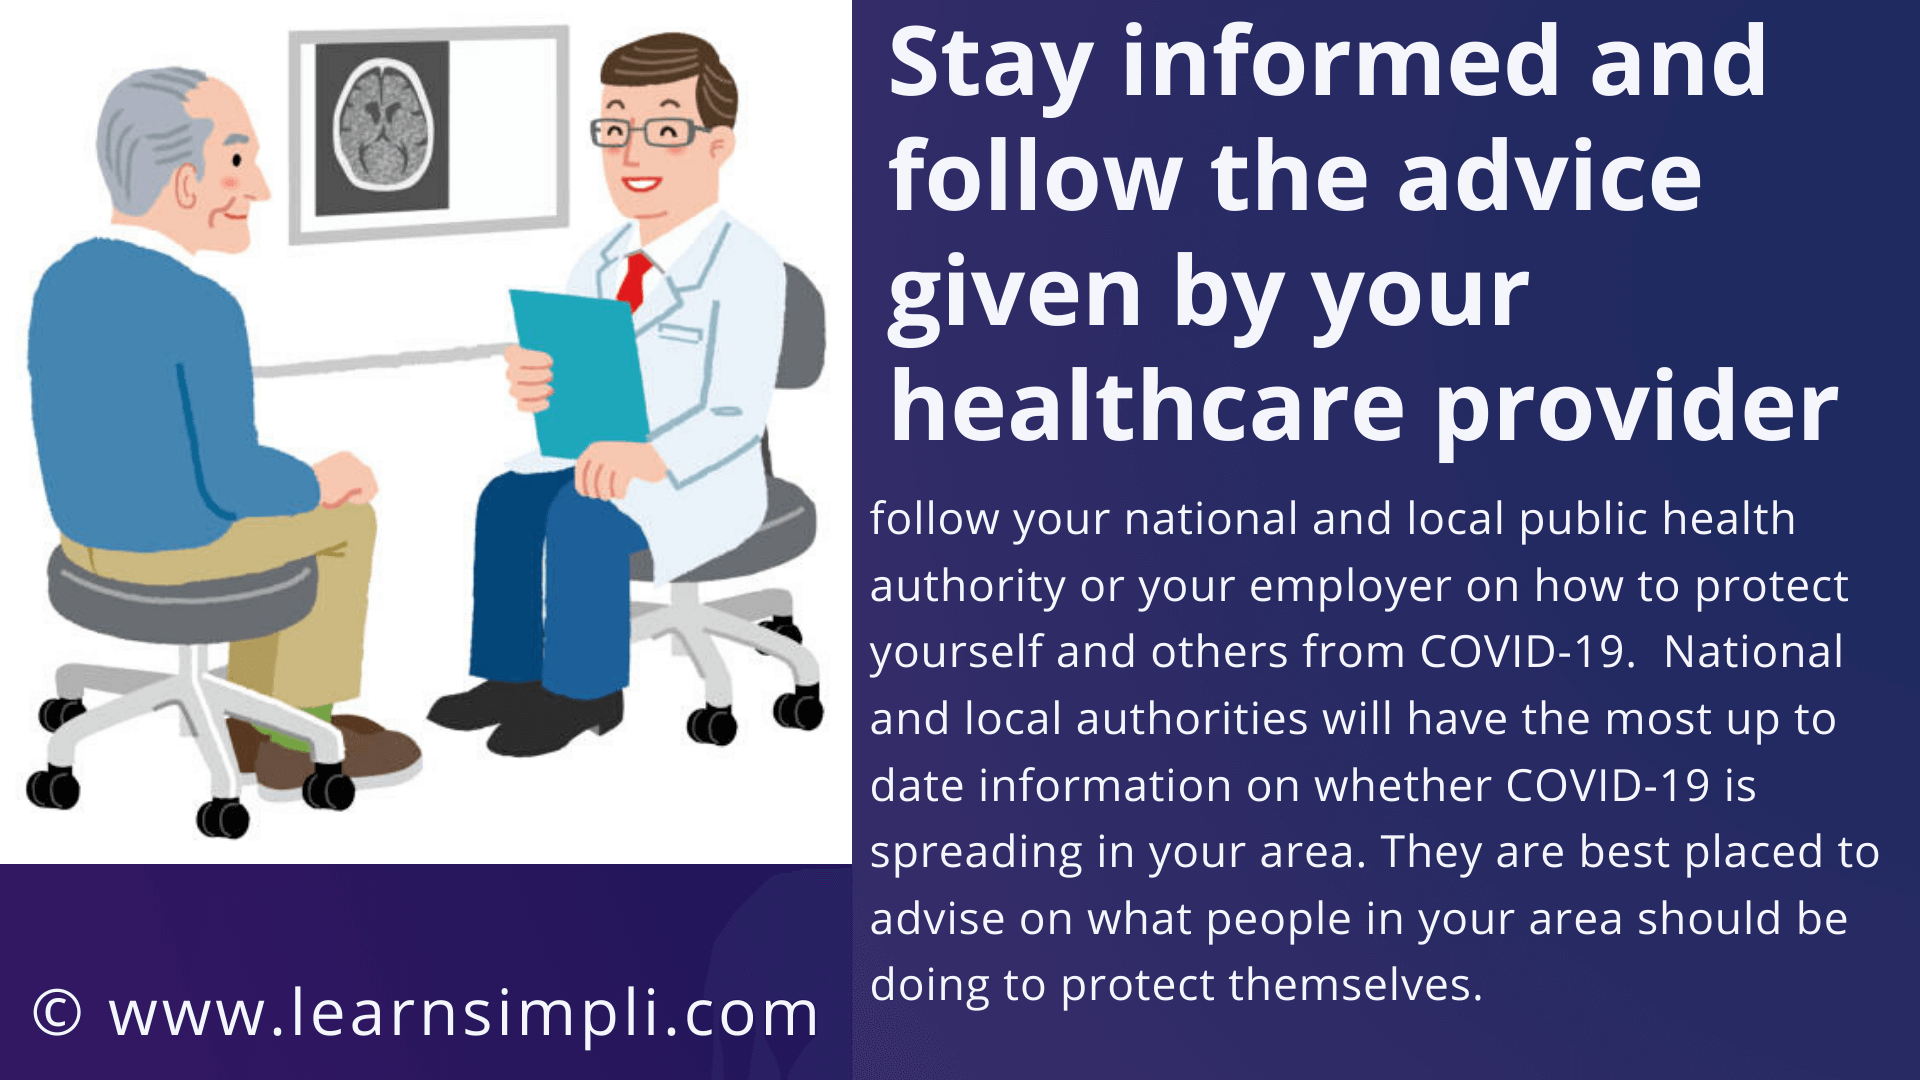 Stay informed and follow the advice given by your healthcare provider